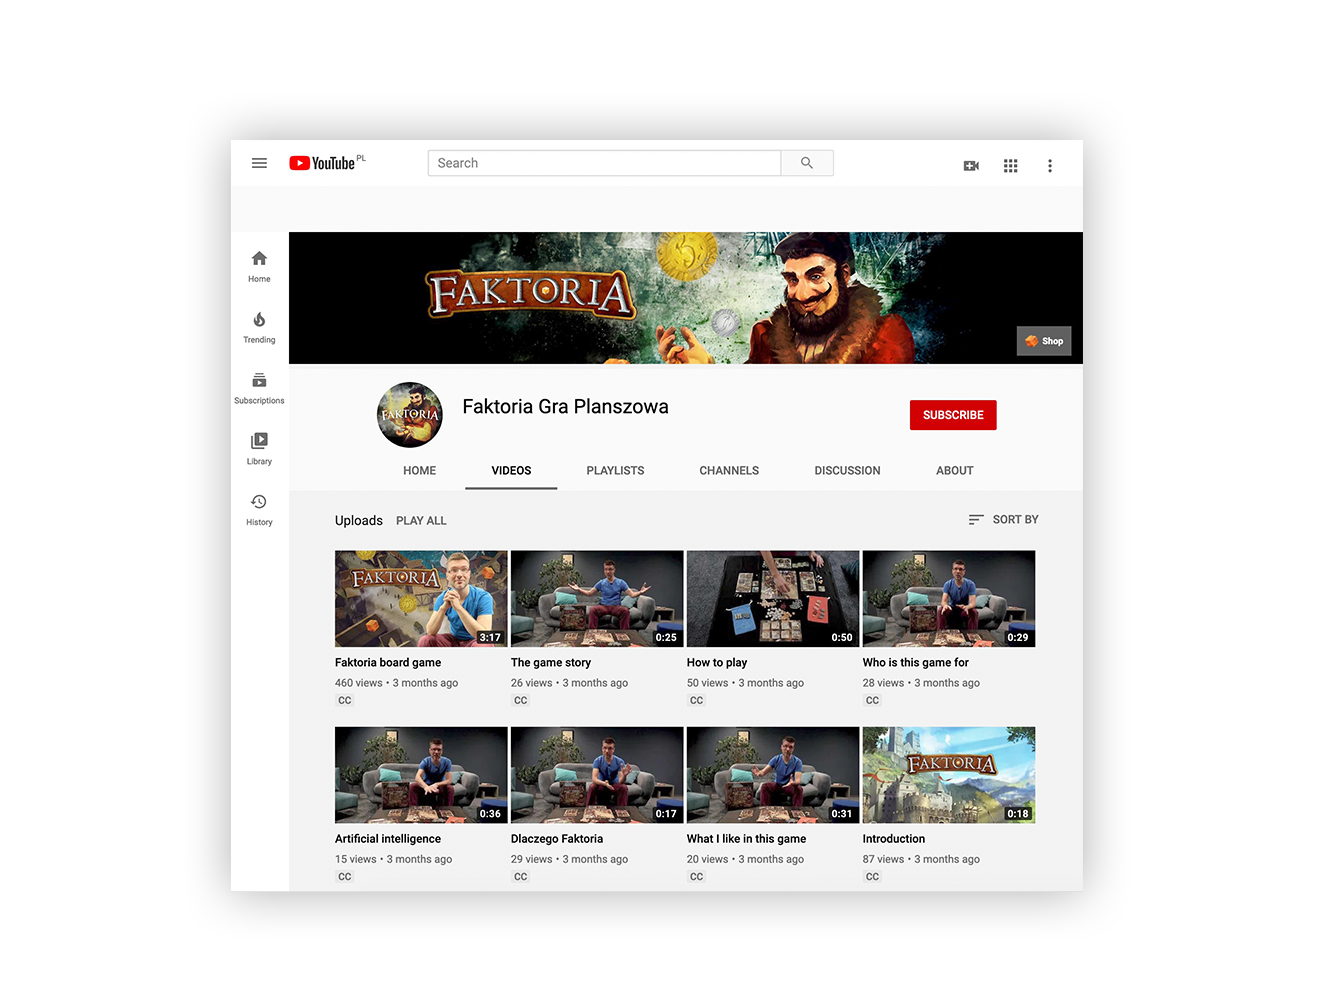 Faktoria - YouTube channel, thumbnails of the game videos and a large banner with a buyer and a coin